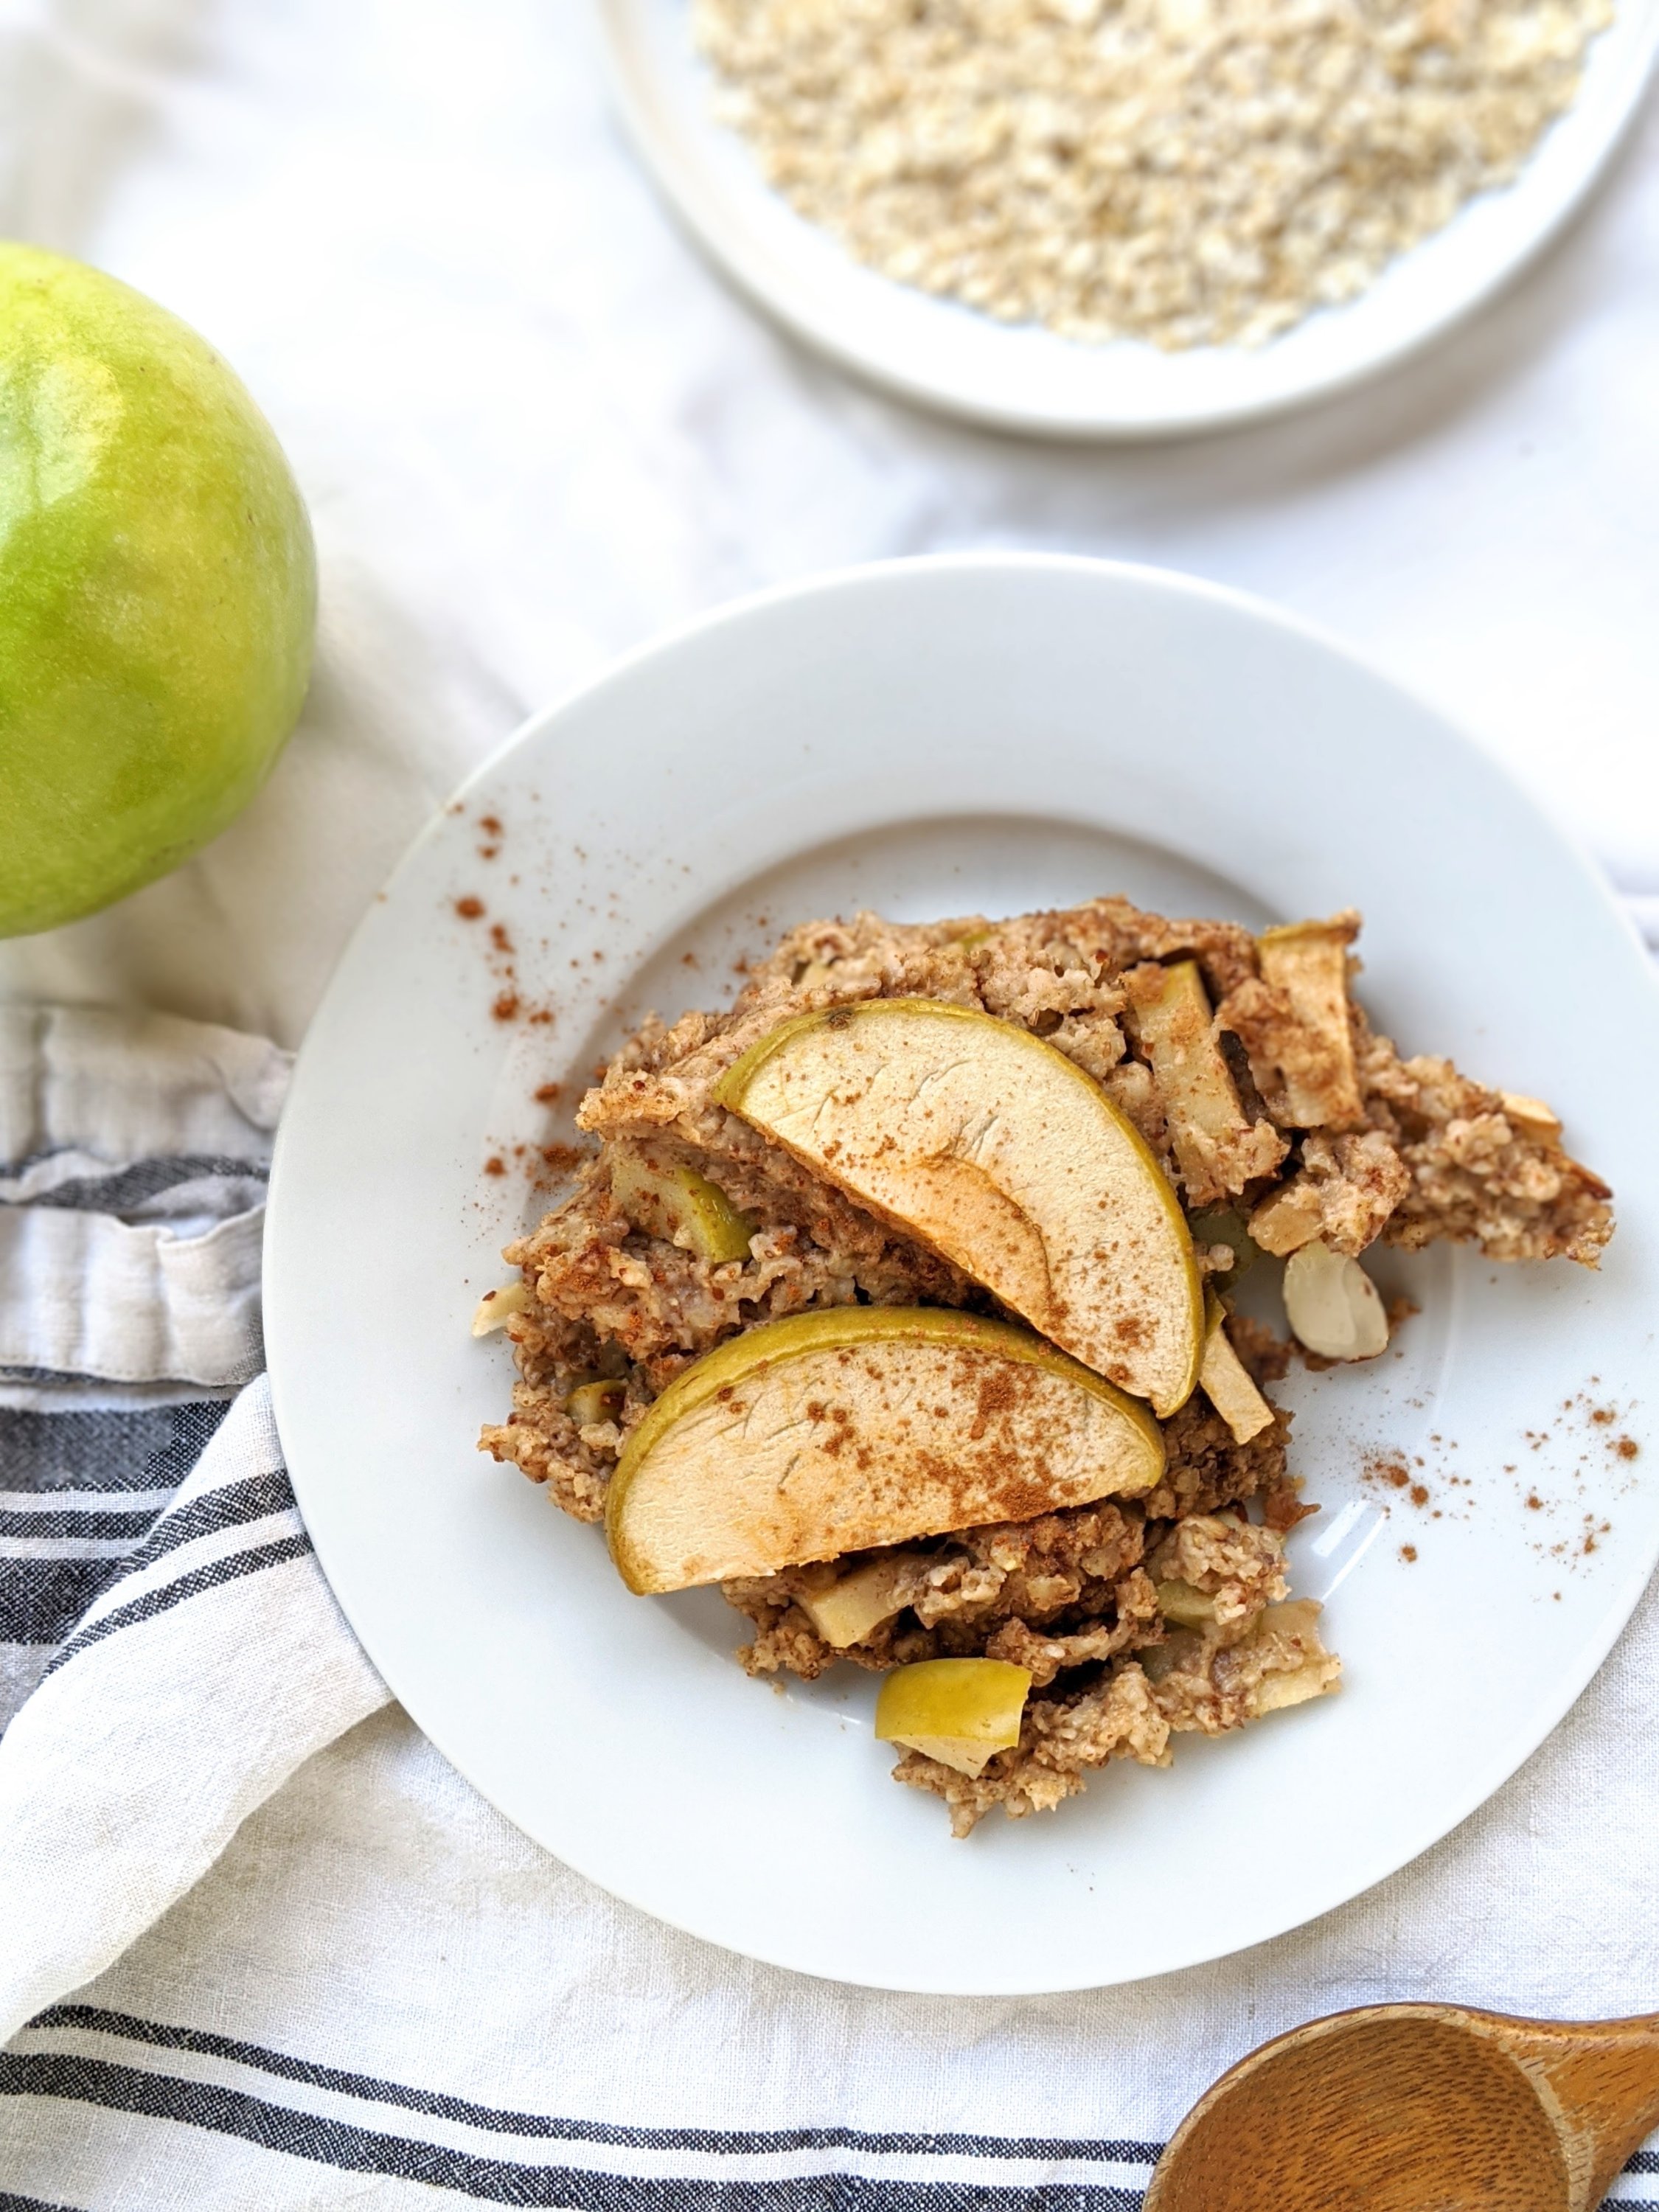 apple pie baked oatmeal recipe healthy baked oats with apples & cinnamon oatmeal baked in the oven